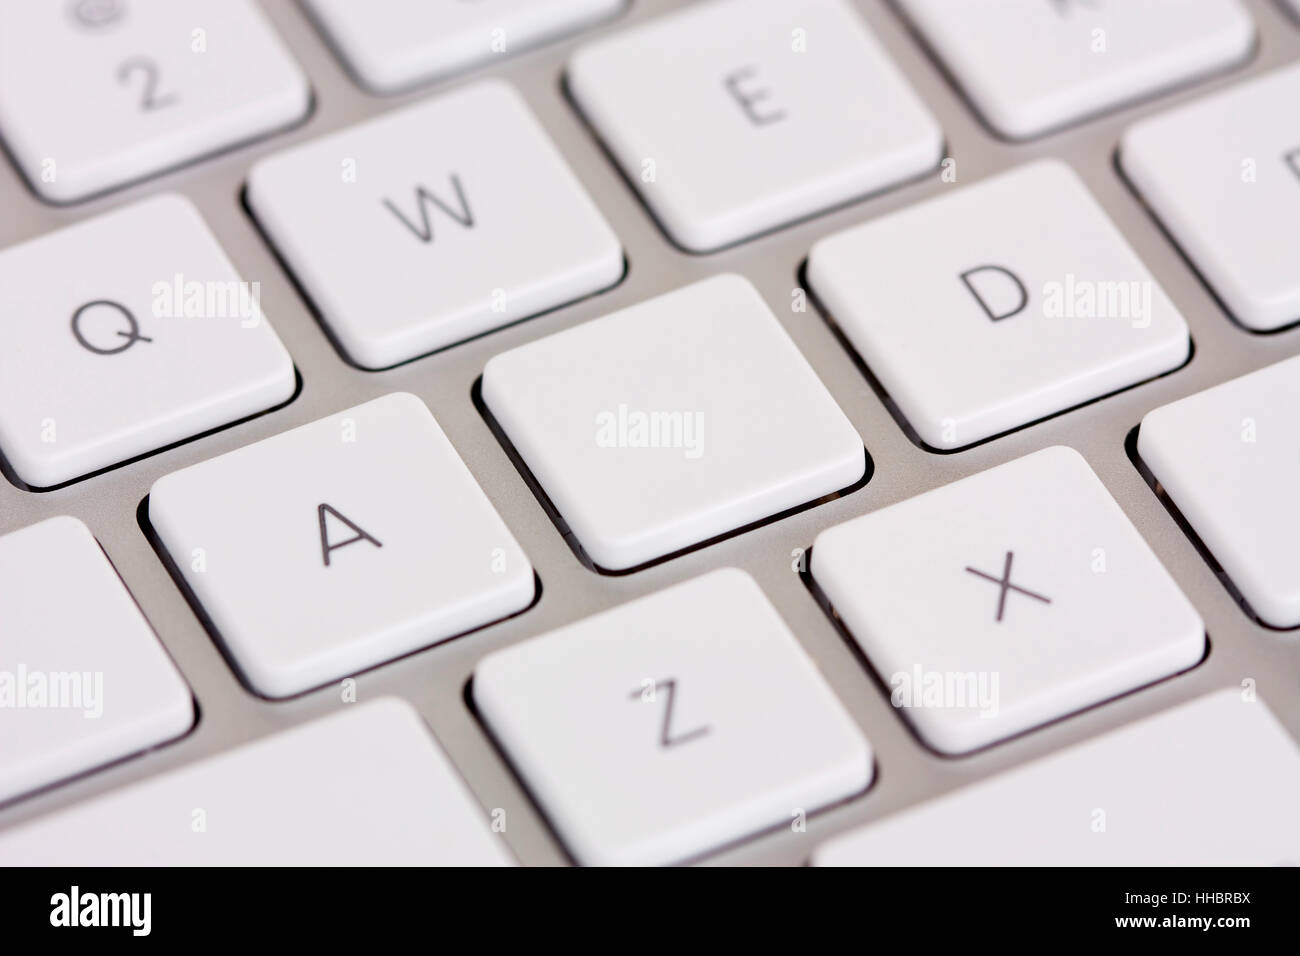 Blank keyboard button for your logo or graphic Stock Photo